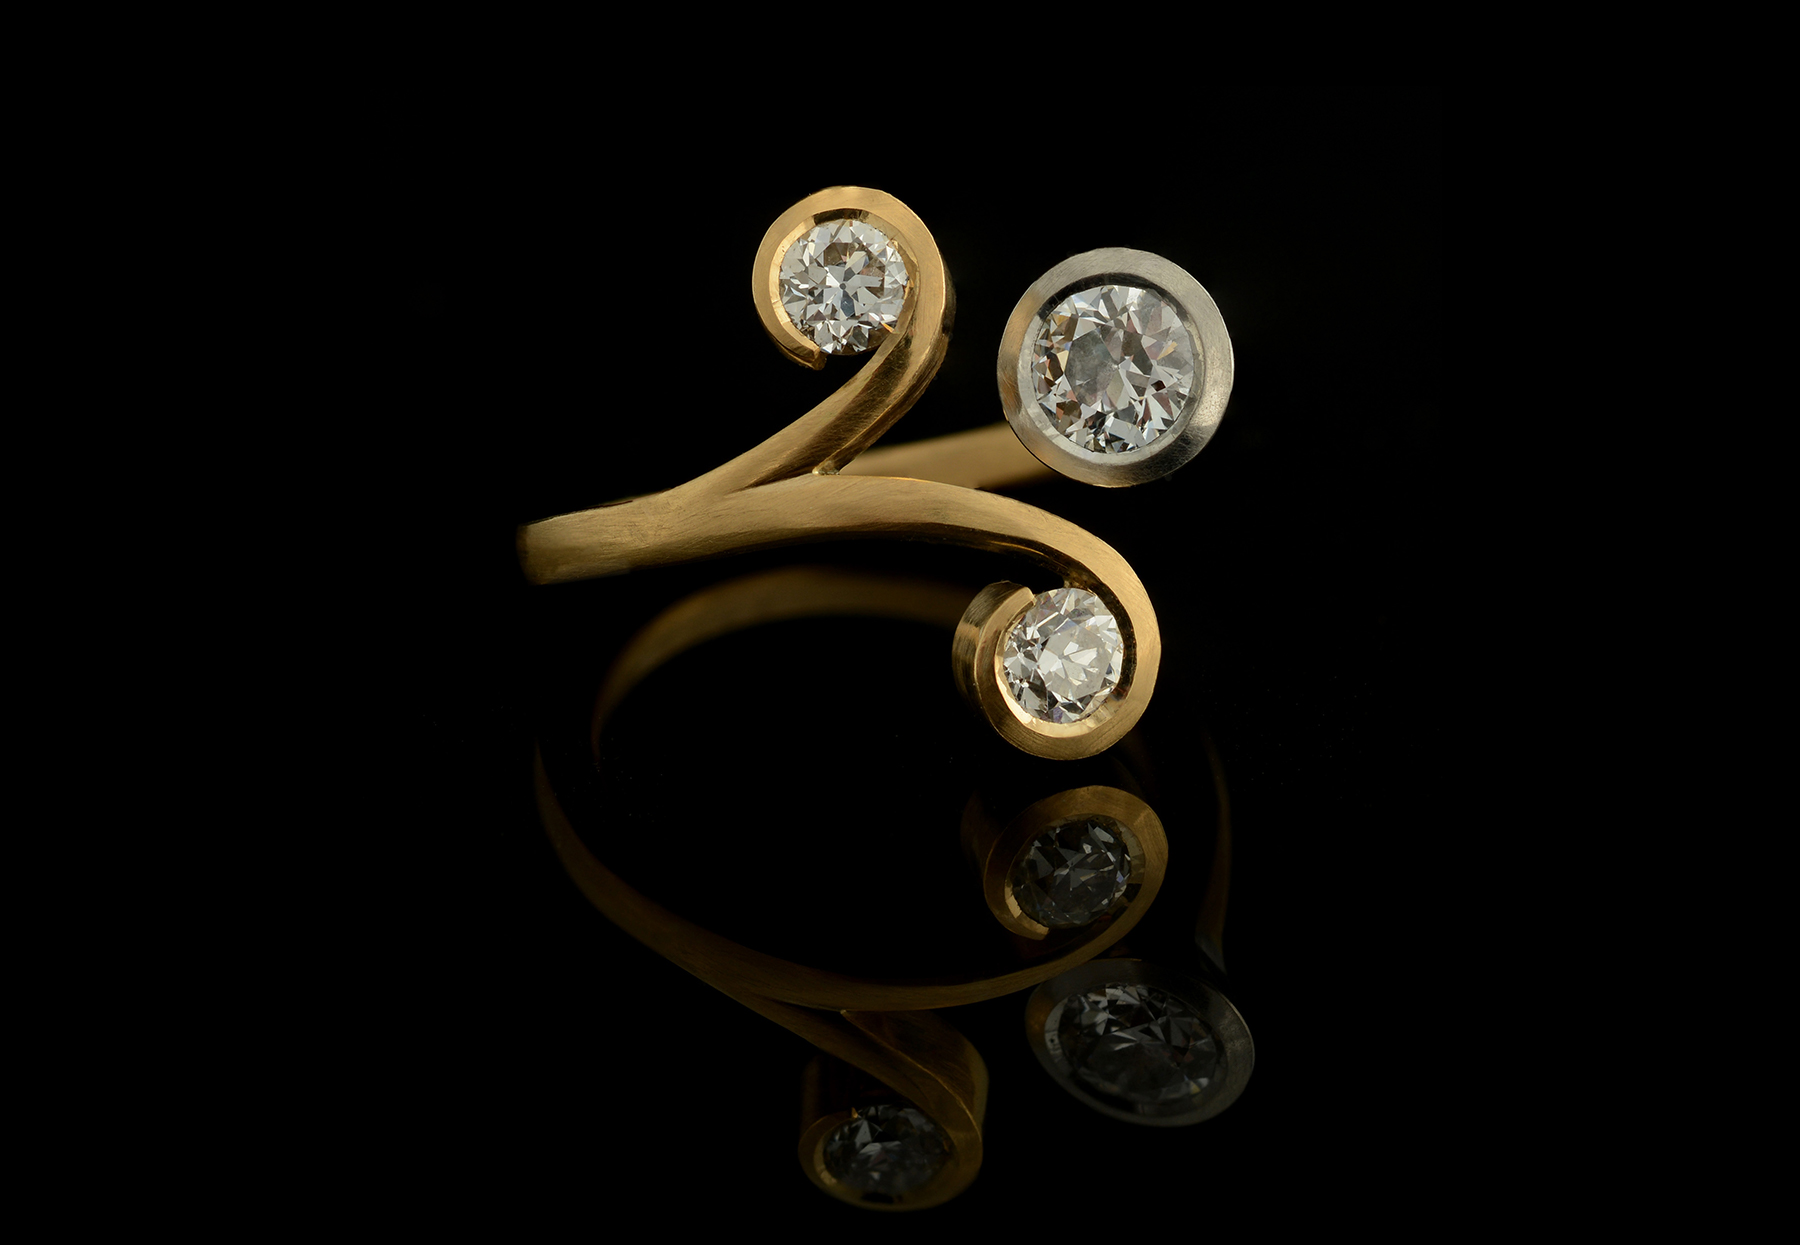 Forged three-stone yellow gold and platinum cocktail ring with old-cut diamonds